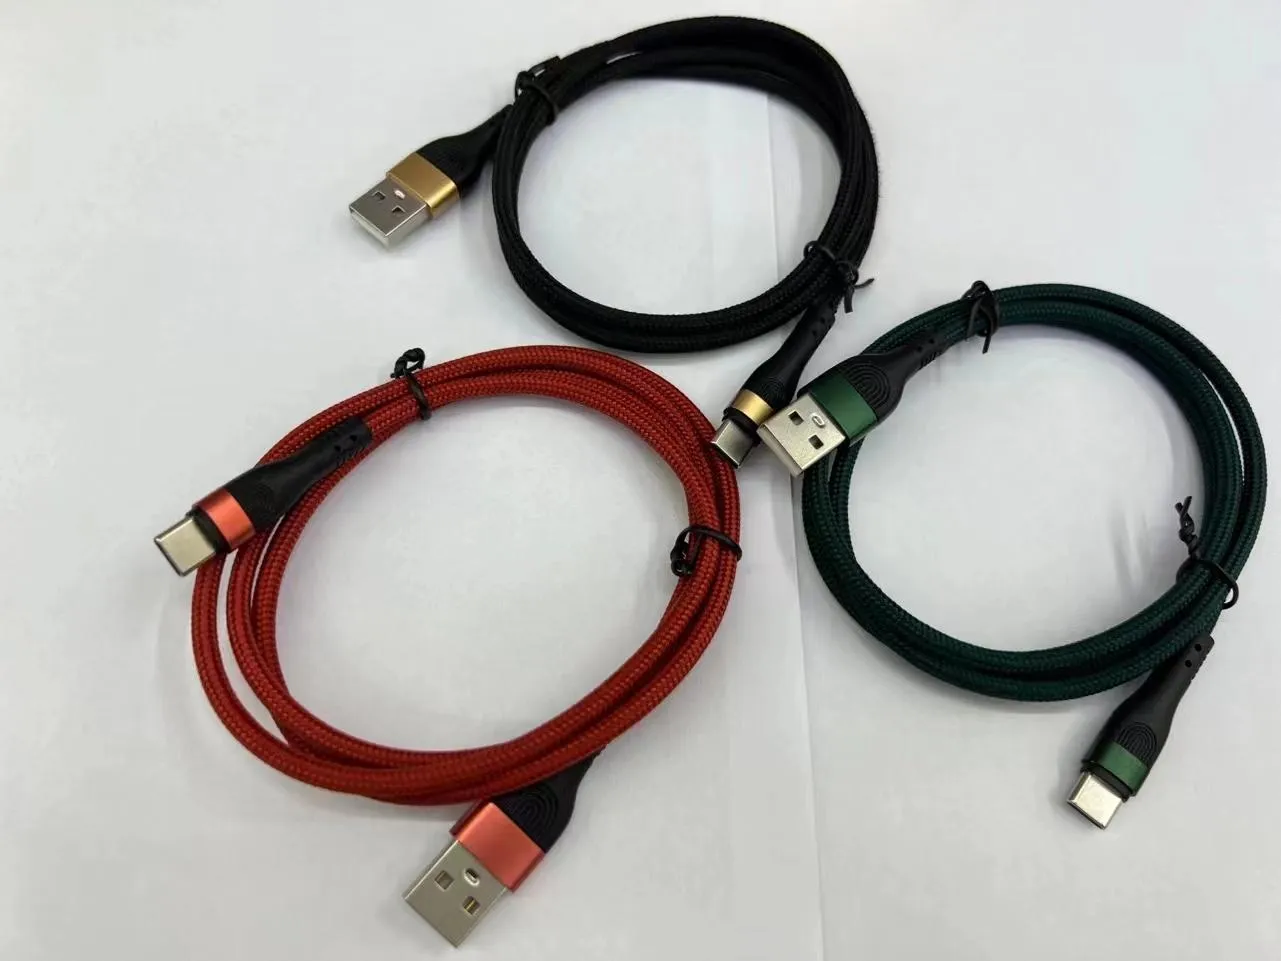 1M Nylon Braided Cables Multi colors Type C Micro USB Data Cable 2.4A Fast Charge Cord for Samsung Xiaomi  phones